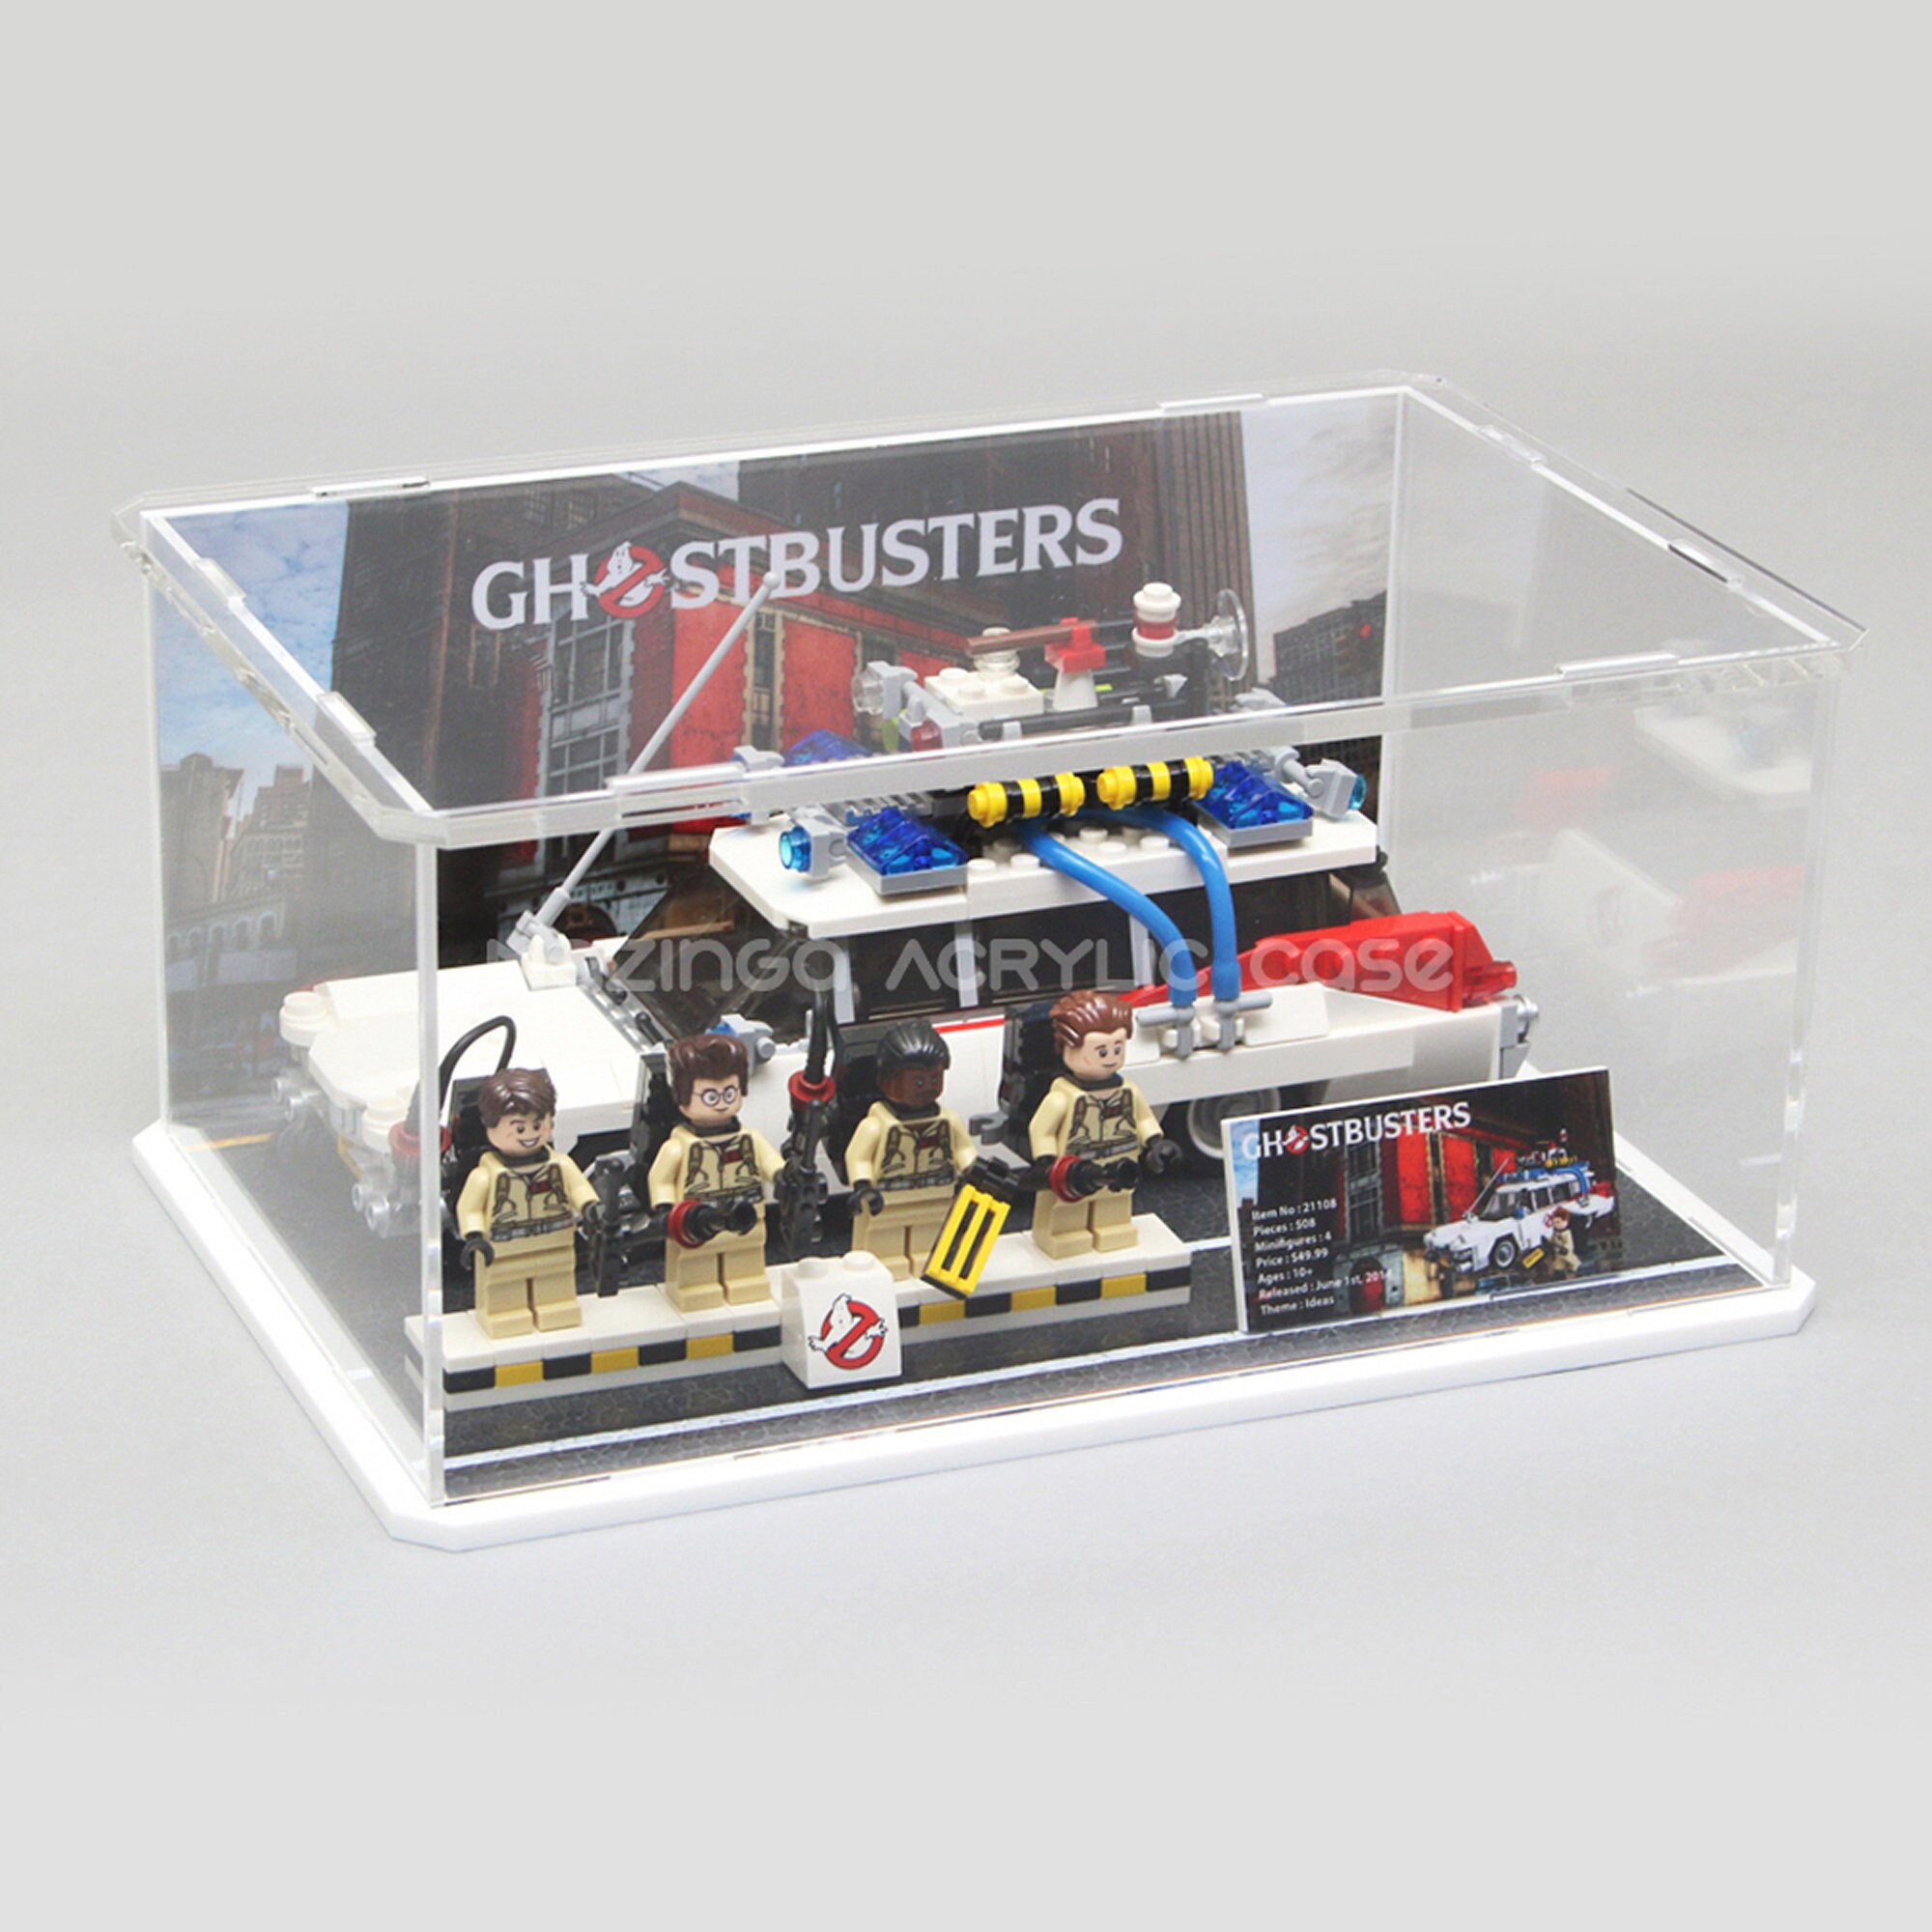 Display Case Picture Frame for Lego Ghostbusters Minifigures 21108 75828 